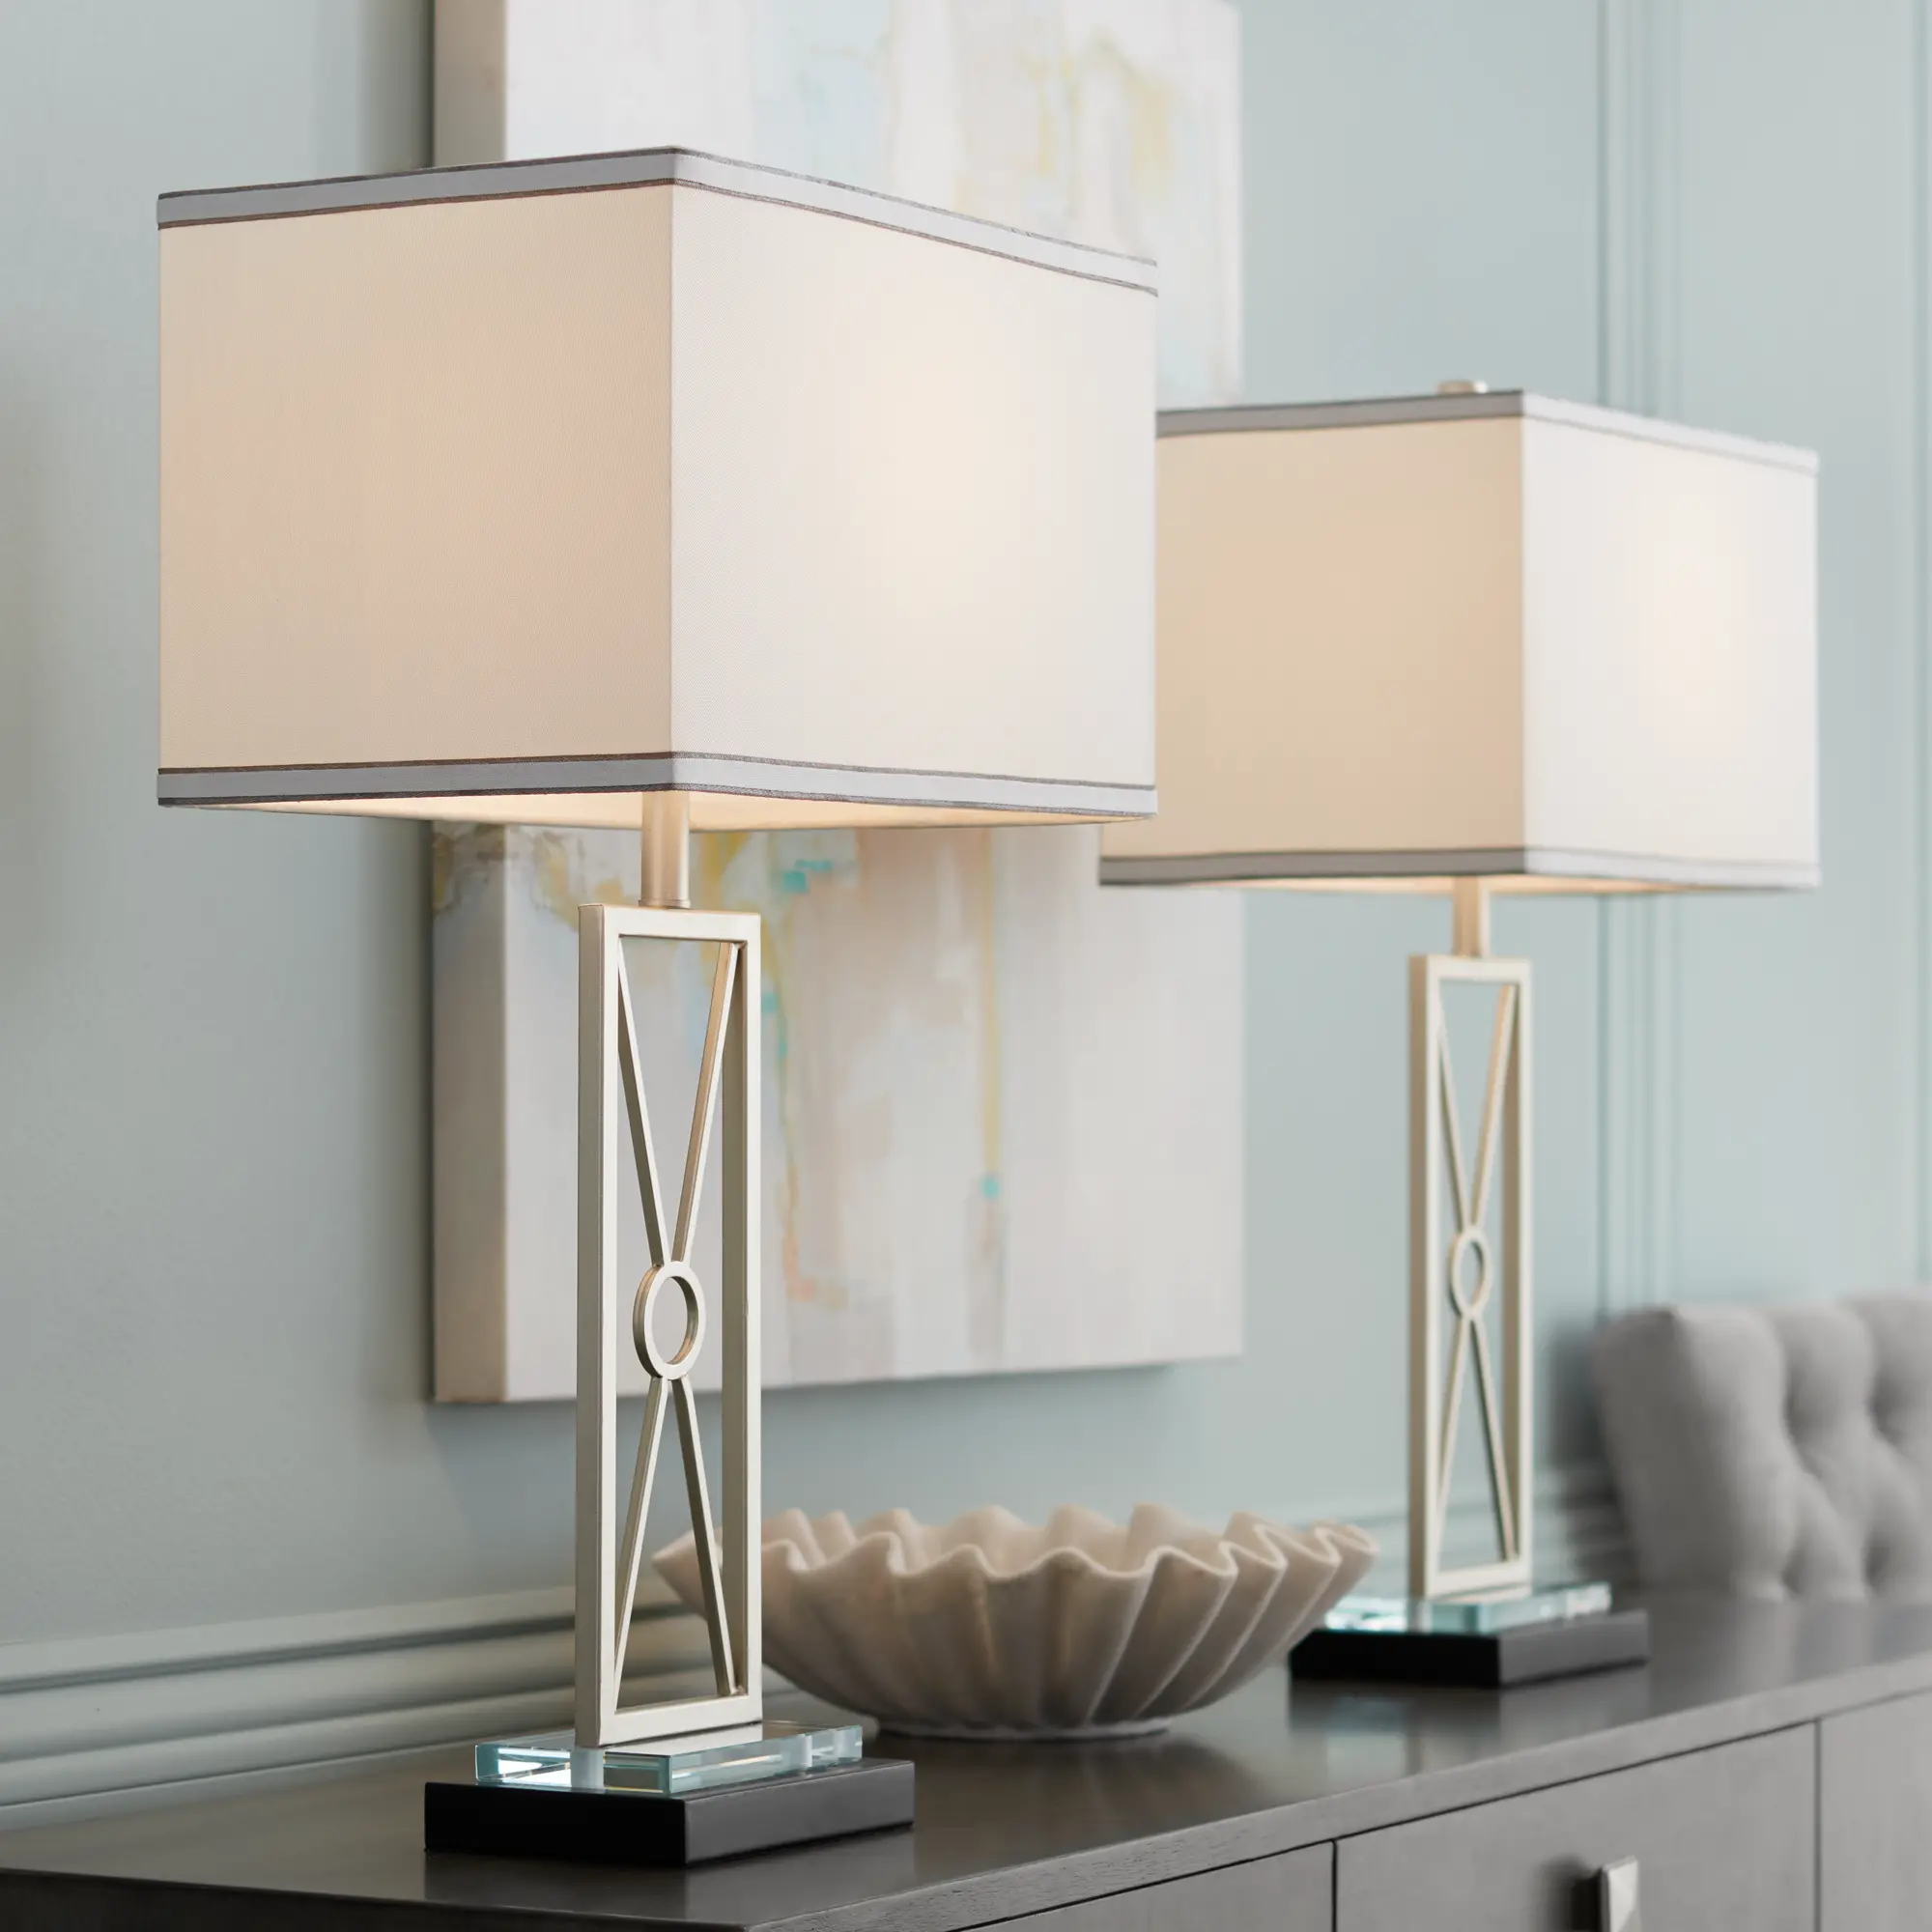 Reflections Modern Table Lamps, Set of 2